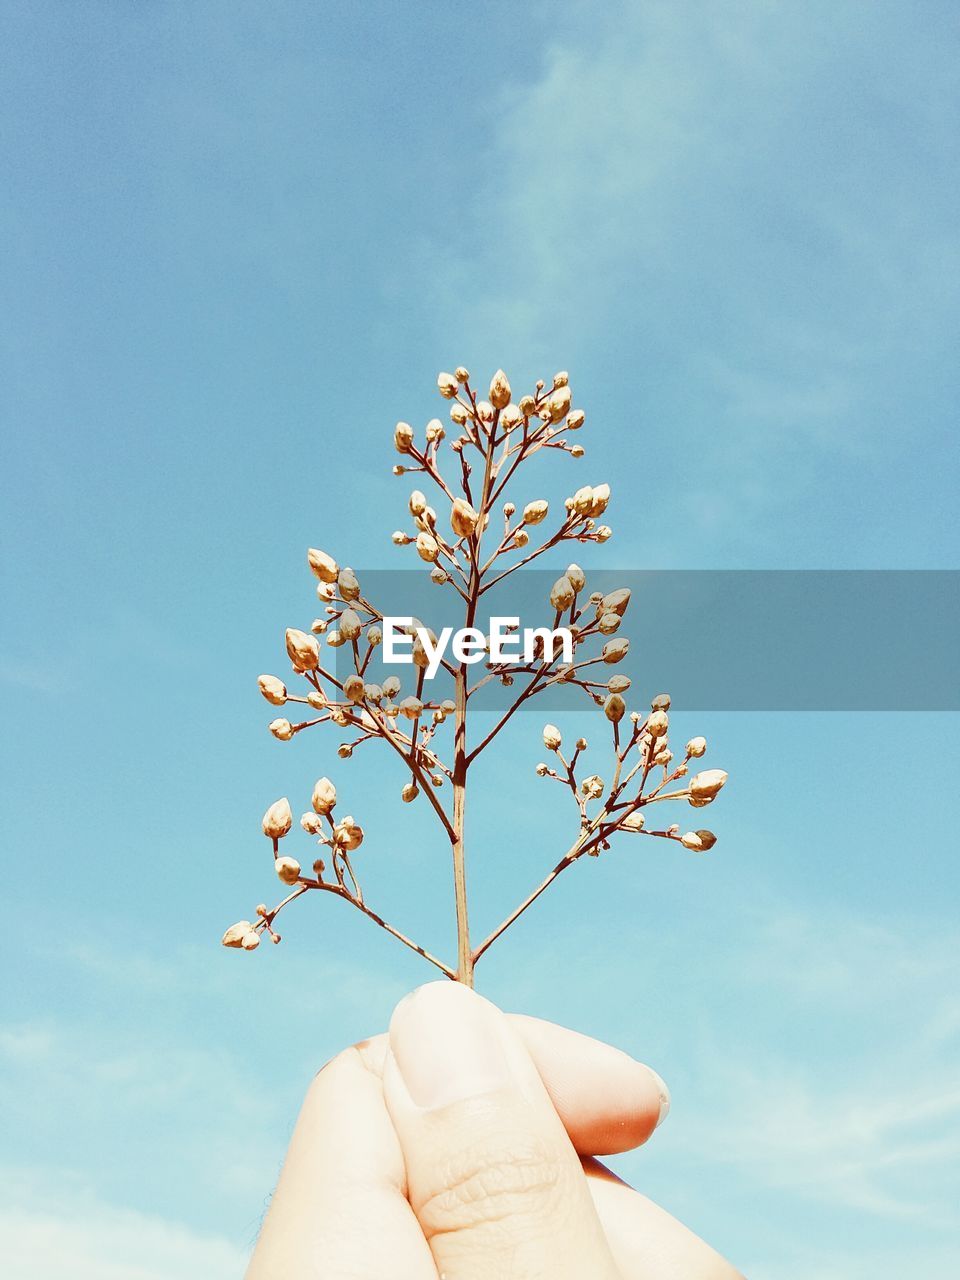 Cropped hand holding flower buds against sky